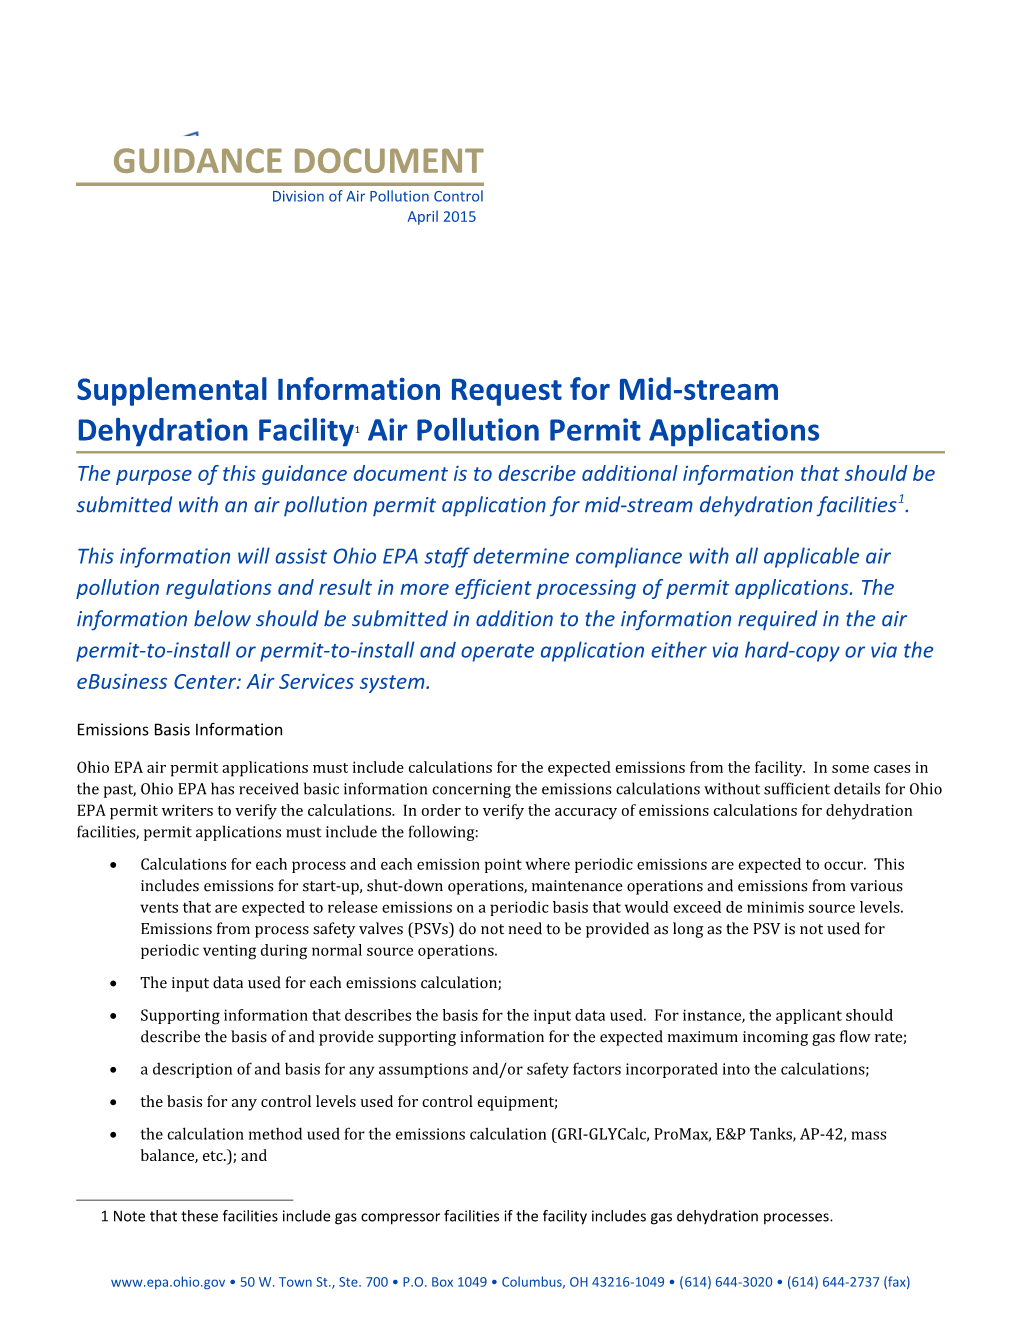 Supplemental Information Request for Mid-Stream Dehydration Facility Air Pollution Permit